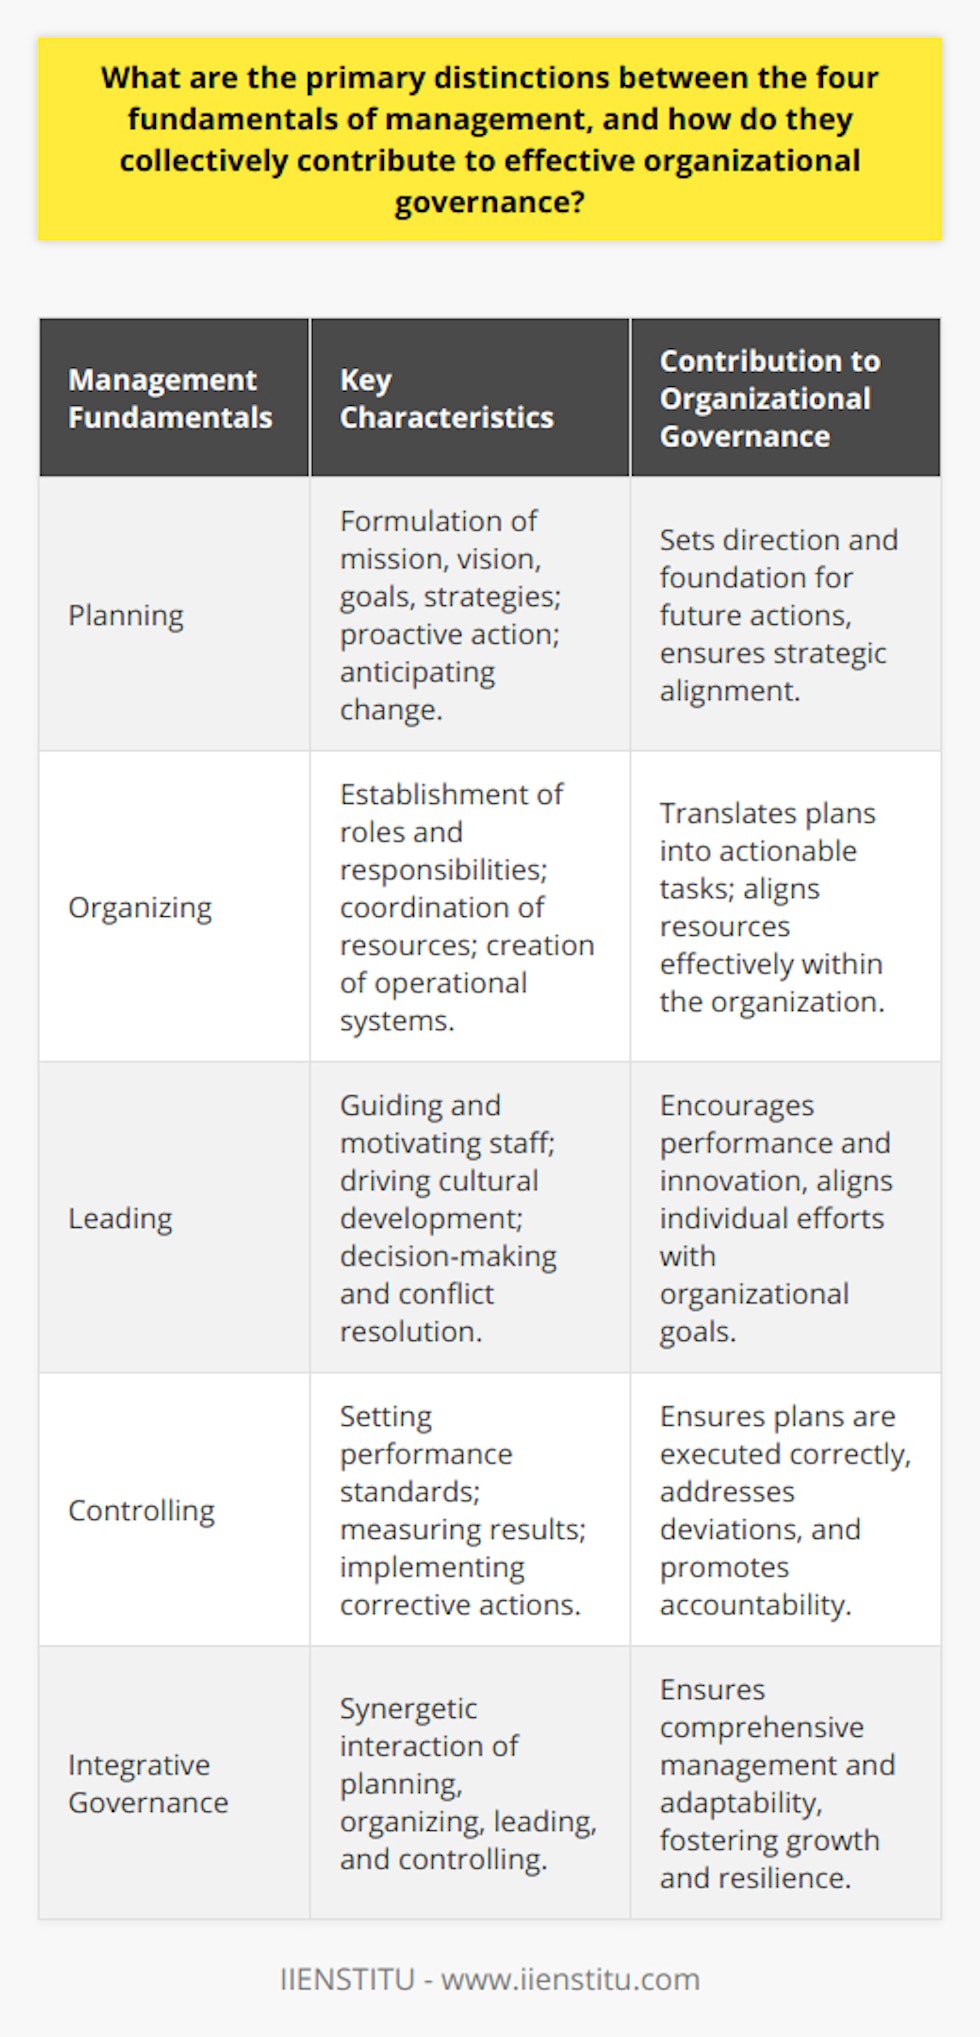 The four fundamentals of management, namely planning, organizing, leading, and controlling, each bear distinct characteristics that contribute to the efficacy of organizational governance. When executed effectively and in harmony, they create a management ecosystem that prompts the organization to thrive.**Planning: The Blueprint of Management**Planning, the initial phase of the management process, involves the formulation of the organization's mission, vision, goals, and strategies. It’s about setting the direction for the future, determining the best course of action, and mapping out the steps necessary to reach the desired destination. Planning is a proactive measure that anticipates changes in the external environment and allows for strategy development to navigate these shifts. Without planning, an organization would lack direction, leading to inefficiencies and potential failure to achieve objectives.**Organizing: The Structural Foundation**Organizing builds upon planning by establishing the internal structure of roles and responsibilities within the organization. It involves the assembly and coordination of resources, such as personnel, finances, and equipment, to transform plans into actionable tasks. Through the creation of organizational charts, workflow systems, and hierarchies, organizing ensures these resources are used effectively and that employees understand their specific roles and how they fit into the larger structure. The distinction of organizing lies in its role in harmonizing resources and activities, a critical step to translate plans into practice.**Leading: The Human Element of Management**Leading, often seen as the most dynamic facet of management, revolves around guiding, influencing, and inspiring team members to pursue collective goals. It concerns the interpersonal aspects of management, from making vital decisions and resolving conflicts to communicating visions and motivating staff. Great leadership fosters a strong organizational culture and aligns the individual ambitions of employees with the organization's broader objectives, which is crucial for driving performance and innovation. Effective leaders are adaptable and empathetic, understanding the diverse needs and drivers of their team members.**Controlling: The Mechanism for Assurance**Controlling is the fundamental that closes the loop in the management process. This stage involves setting performance standards, measuring actual performance, and applying corrective actions if there are deviations from the plan. Controlling functions as the quality check of management, ensuring that all other fundamentals are operating as intended and that the organization remains on the path to achieving its goals. Through regular monitoring and evaluation, controlling identifies areas for improvement and provides data-driven insights for informed decision-making, thereby promoting accountability within the organization.**Integrative Governance and Overall Success**When these management fundamentals are well-integrated, they provide a robust foundation for effective organizational governance. Each function interacts with the others, forming an organic system guided by strategic direction and enabled by structured execution, compelling leadership, and continuous oversight. The planning stages inform the structuring of resources, the mobilization of personnel, and the methods for tracking progress and adjusting course. In turn, the organizing, leading, and controlling stages contribute feedback that refines and enhances the planning processes. This cyclical relationship ensures that the organization not only sets the right goals but also possesses the means and agility to adapt and achieve them, thus fostering sustainable growth and resilience in an ever-changing business landscape.